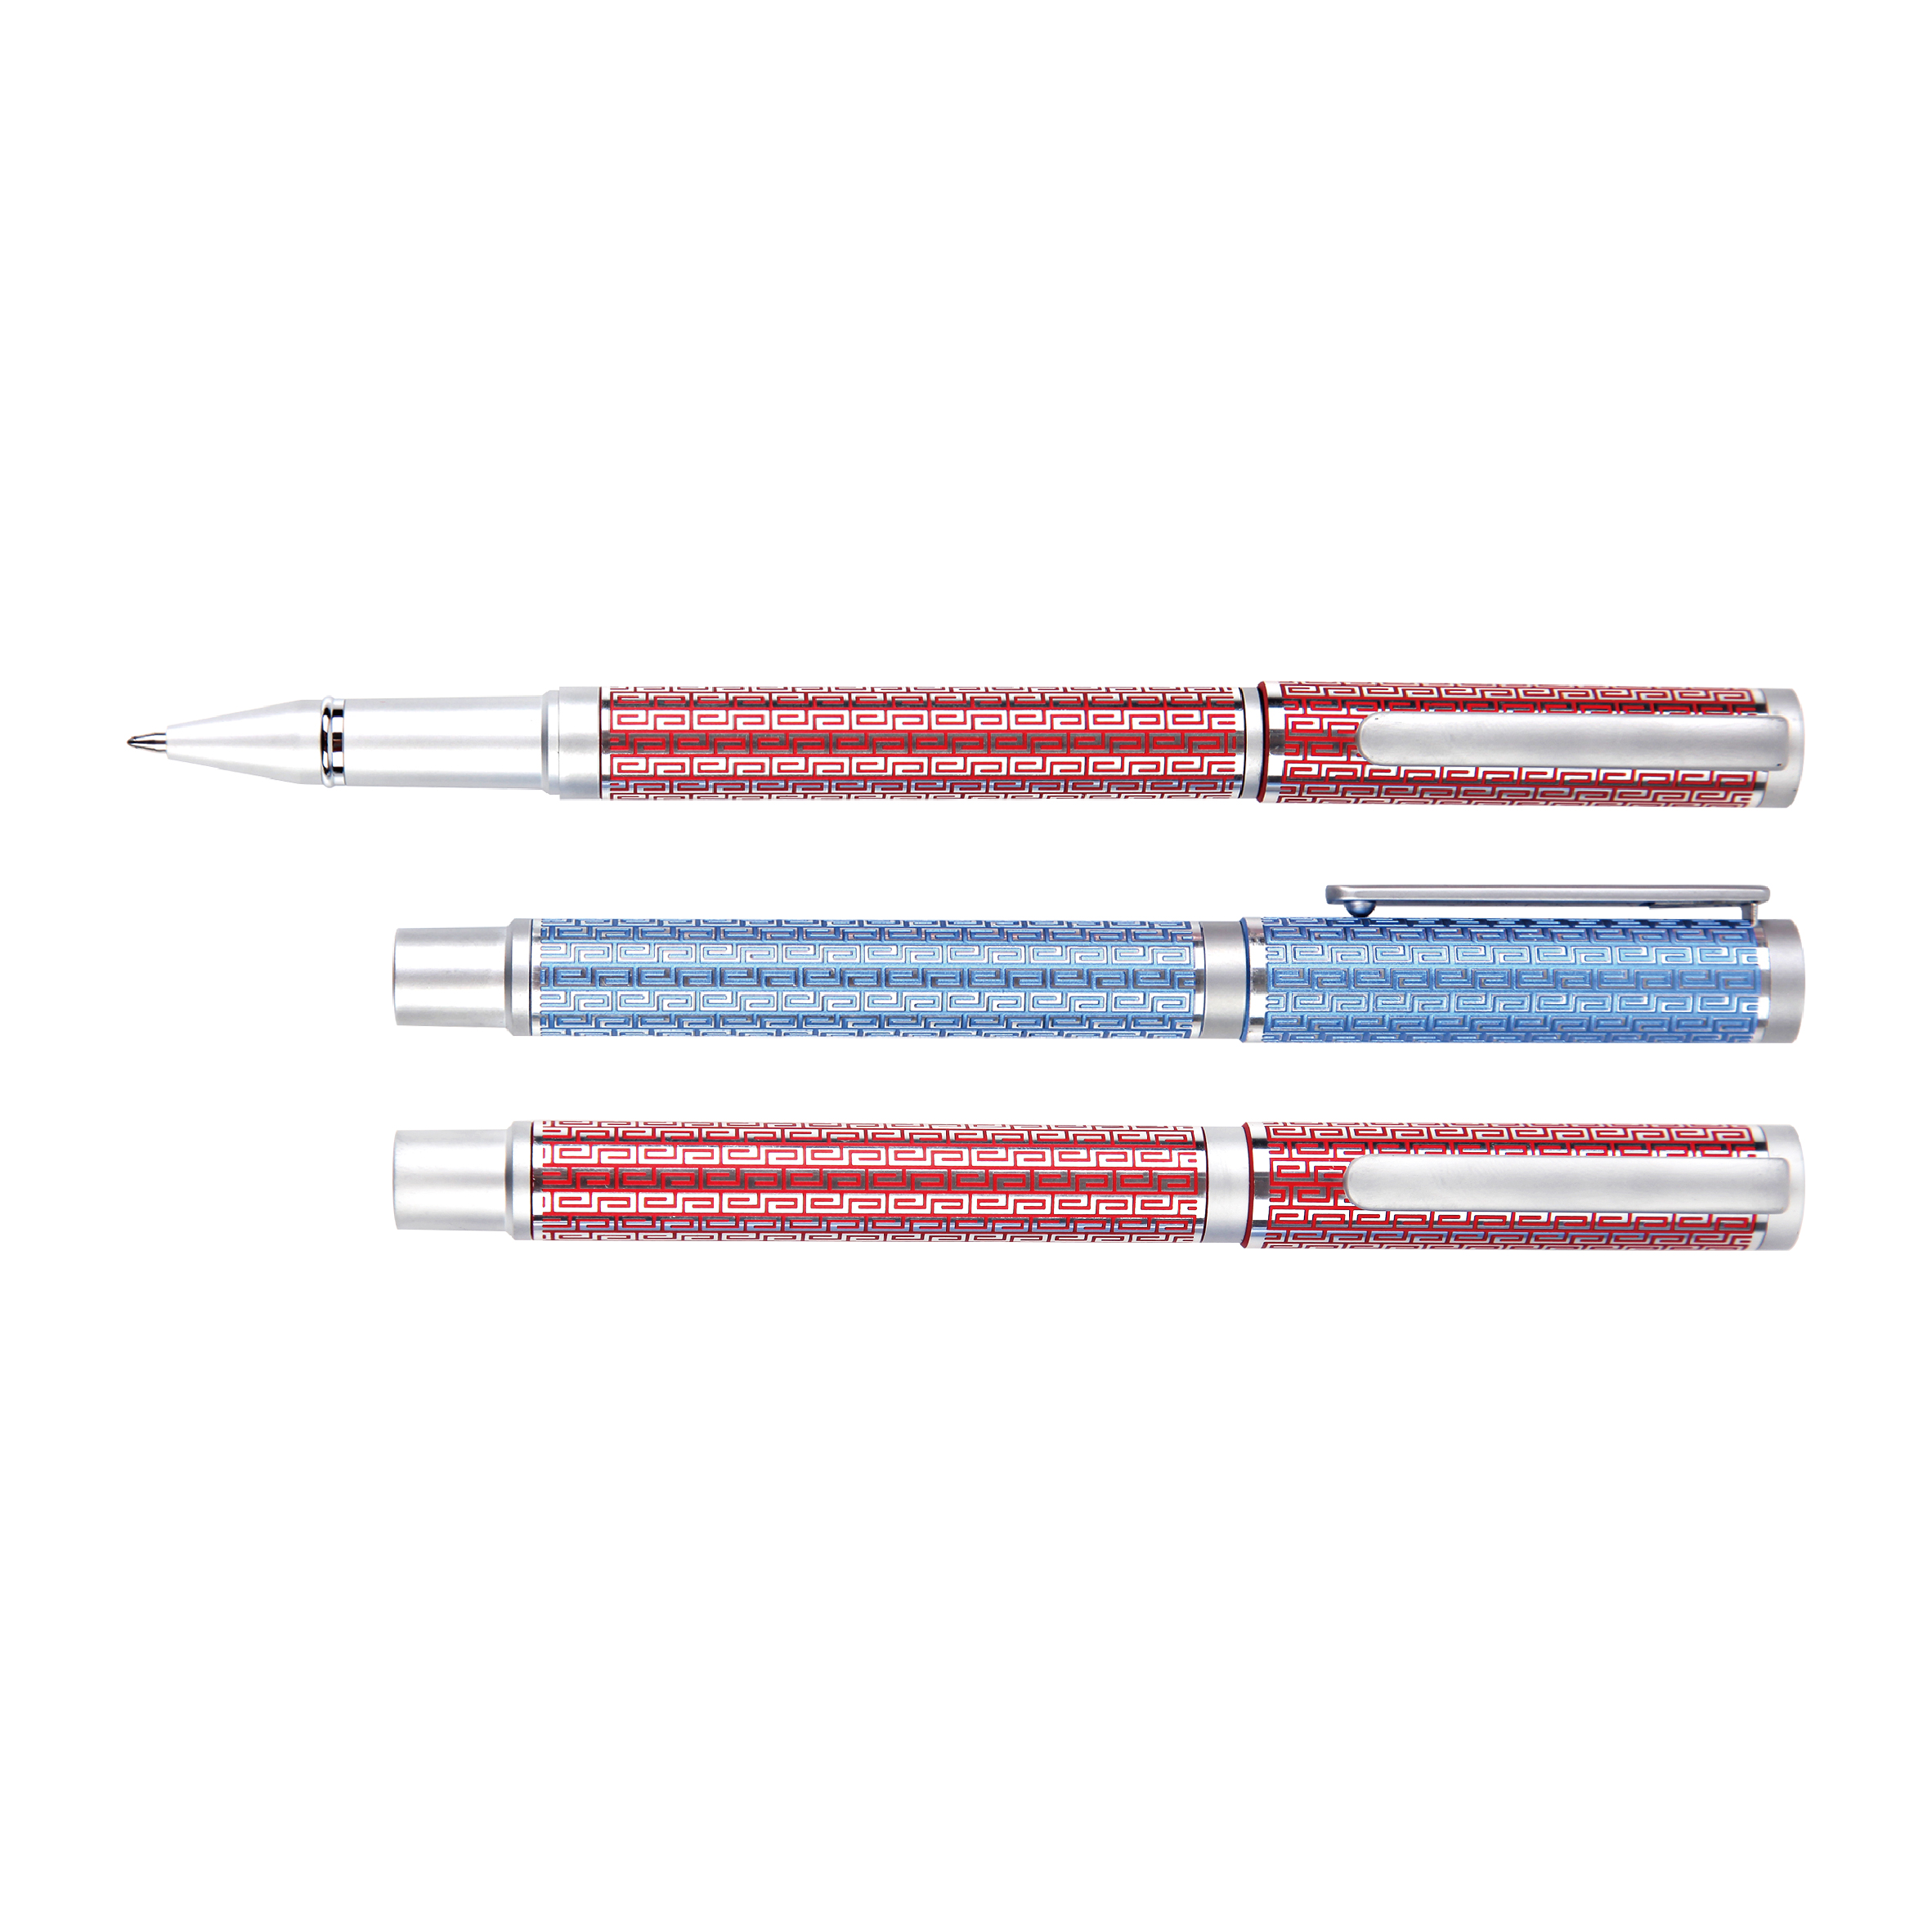 0.7&1.0mm Metal High Value Gel Pen with Pattern for Office Home